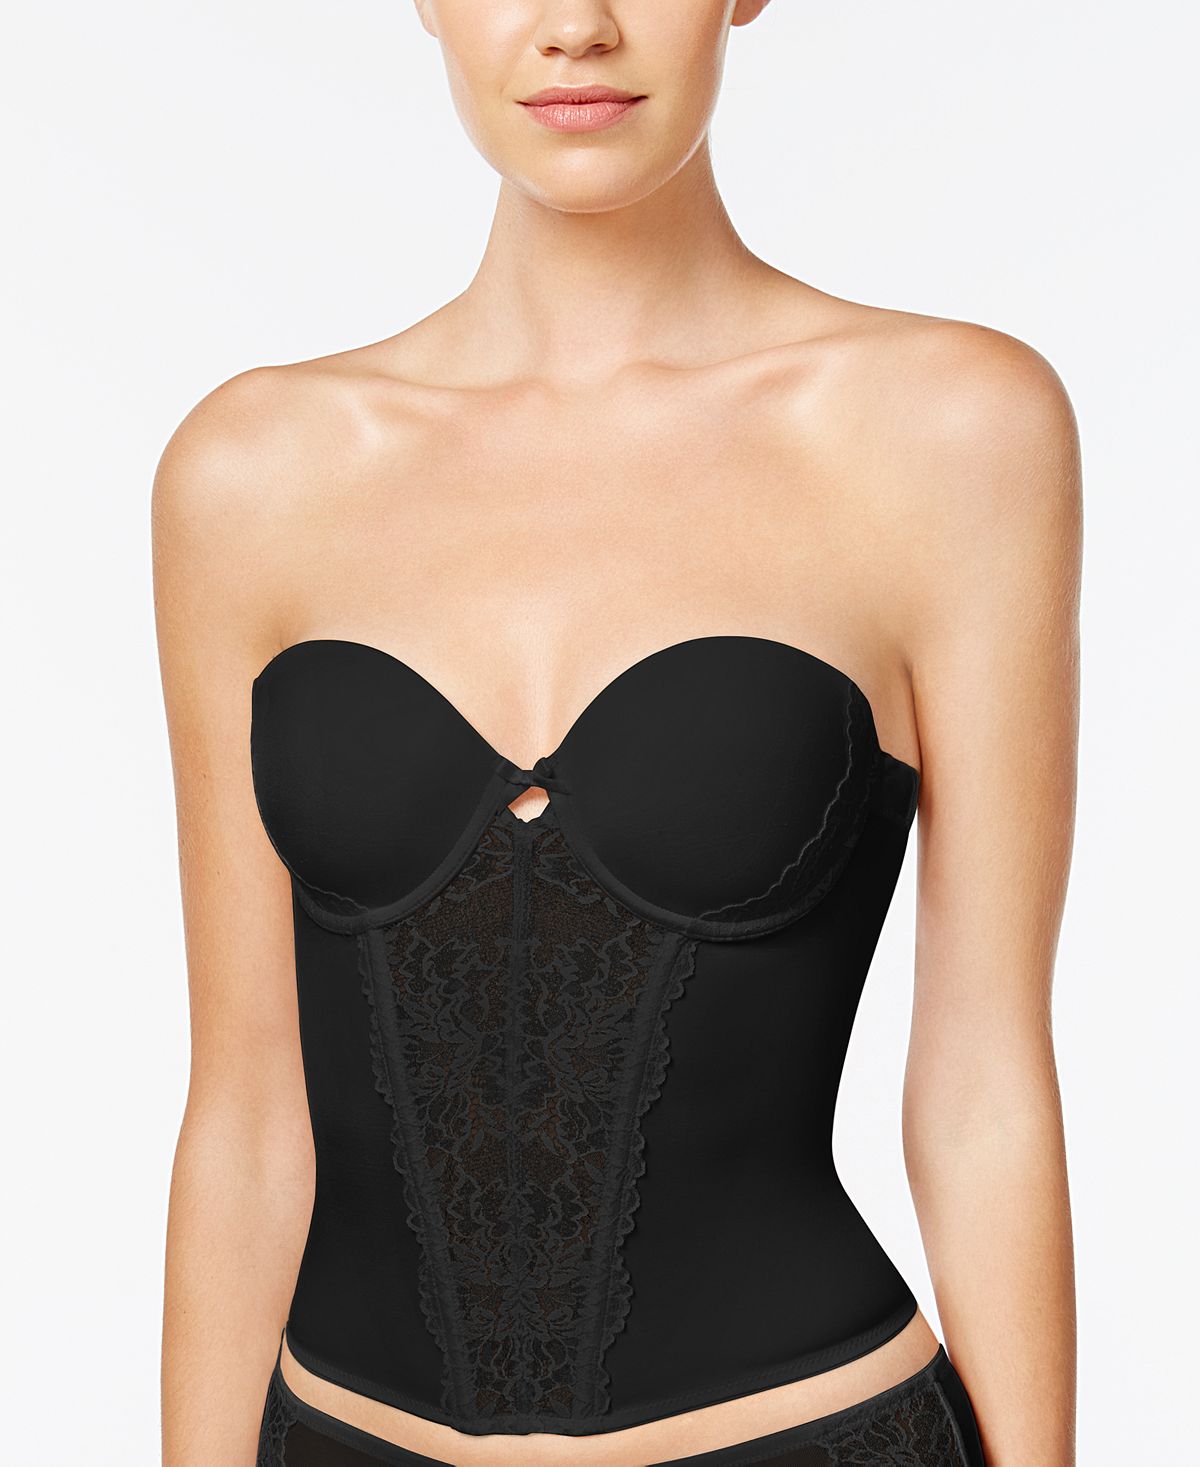 Maidenform Super Sexy Strapless Floral Lace Push-up Bustier Mfb100 Black